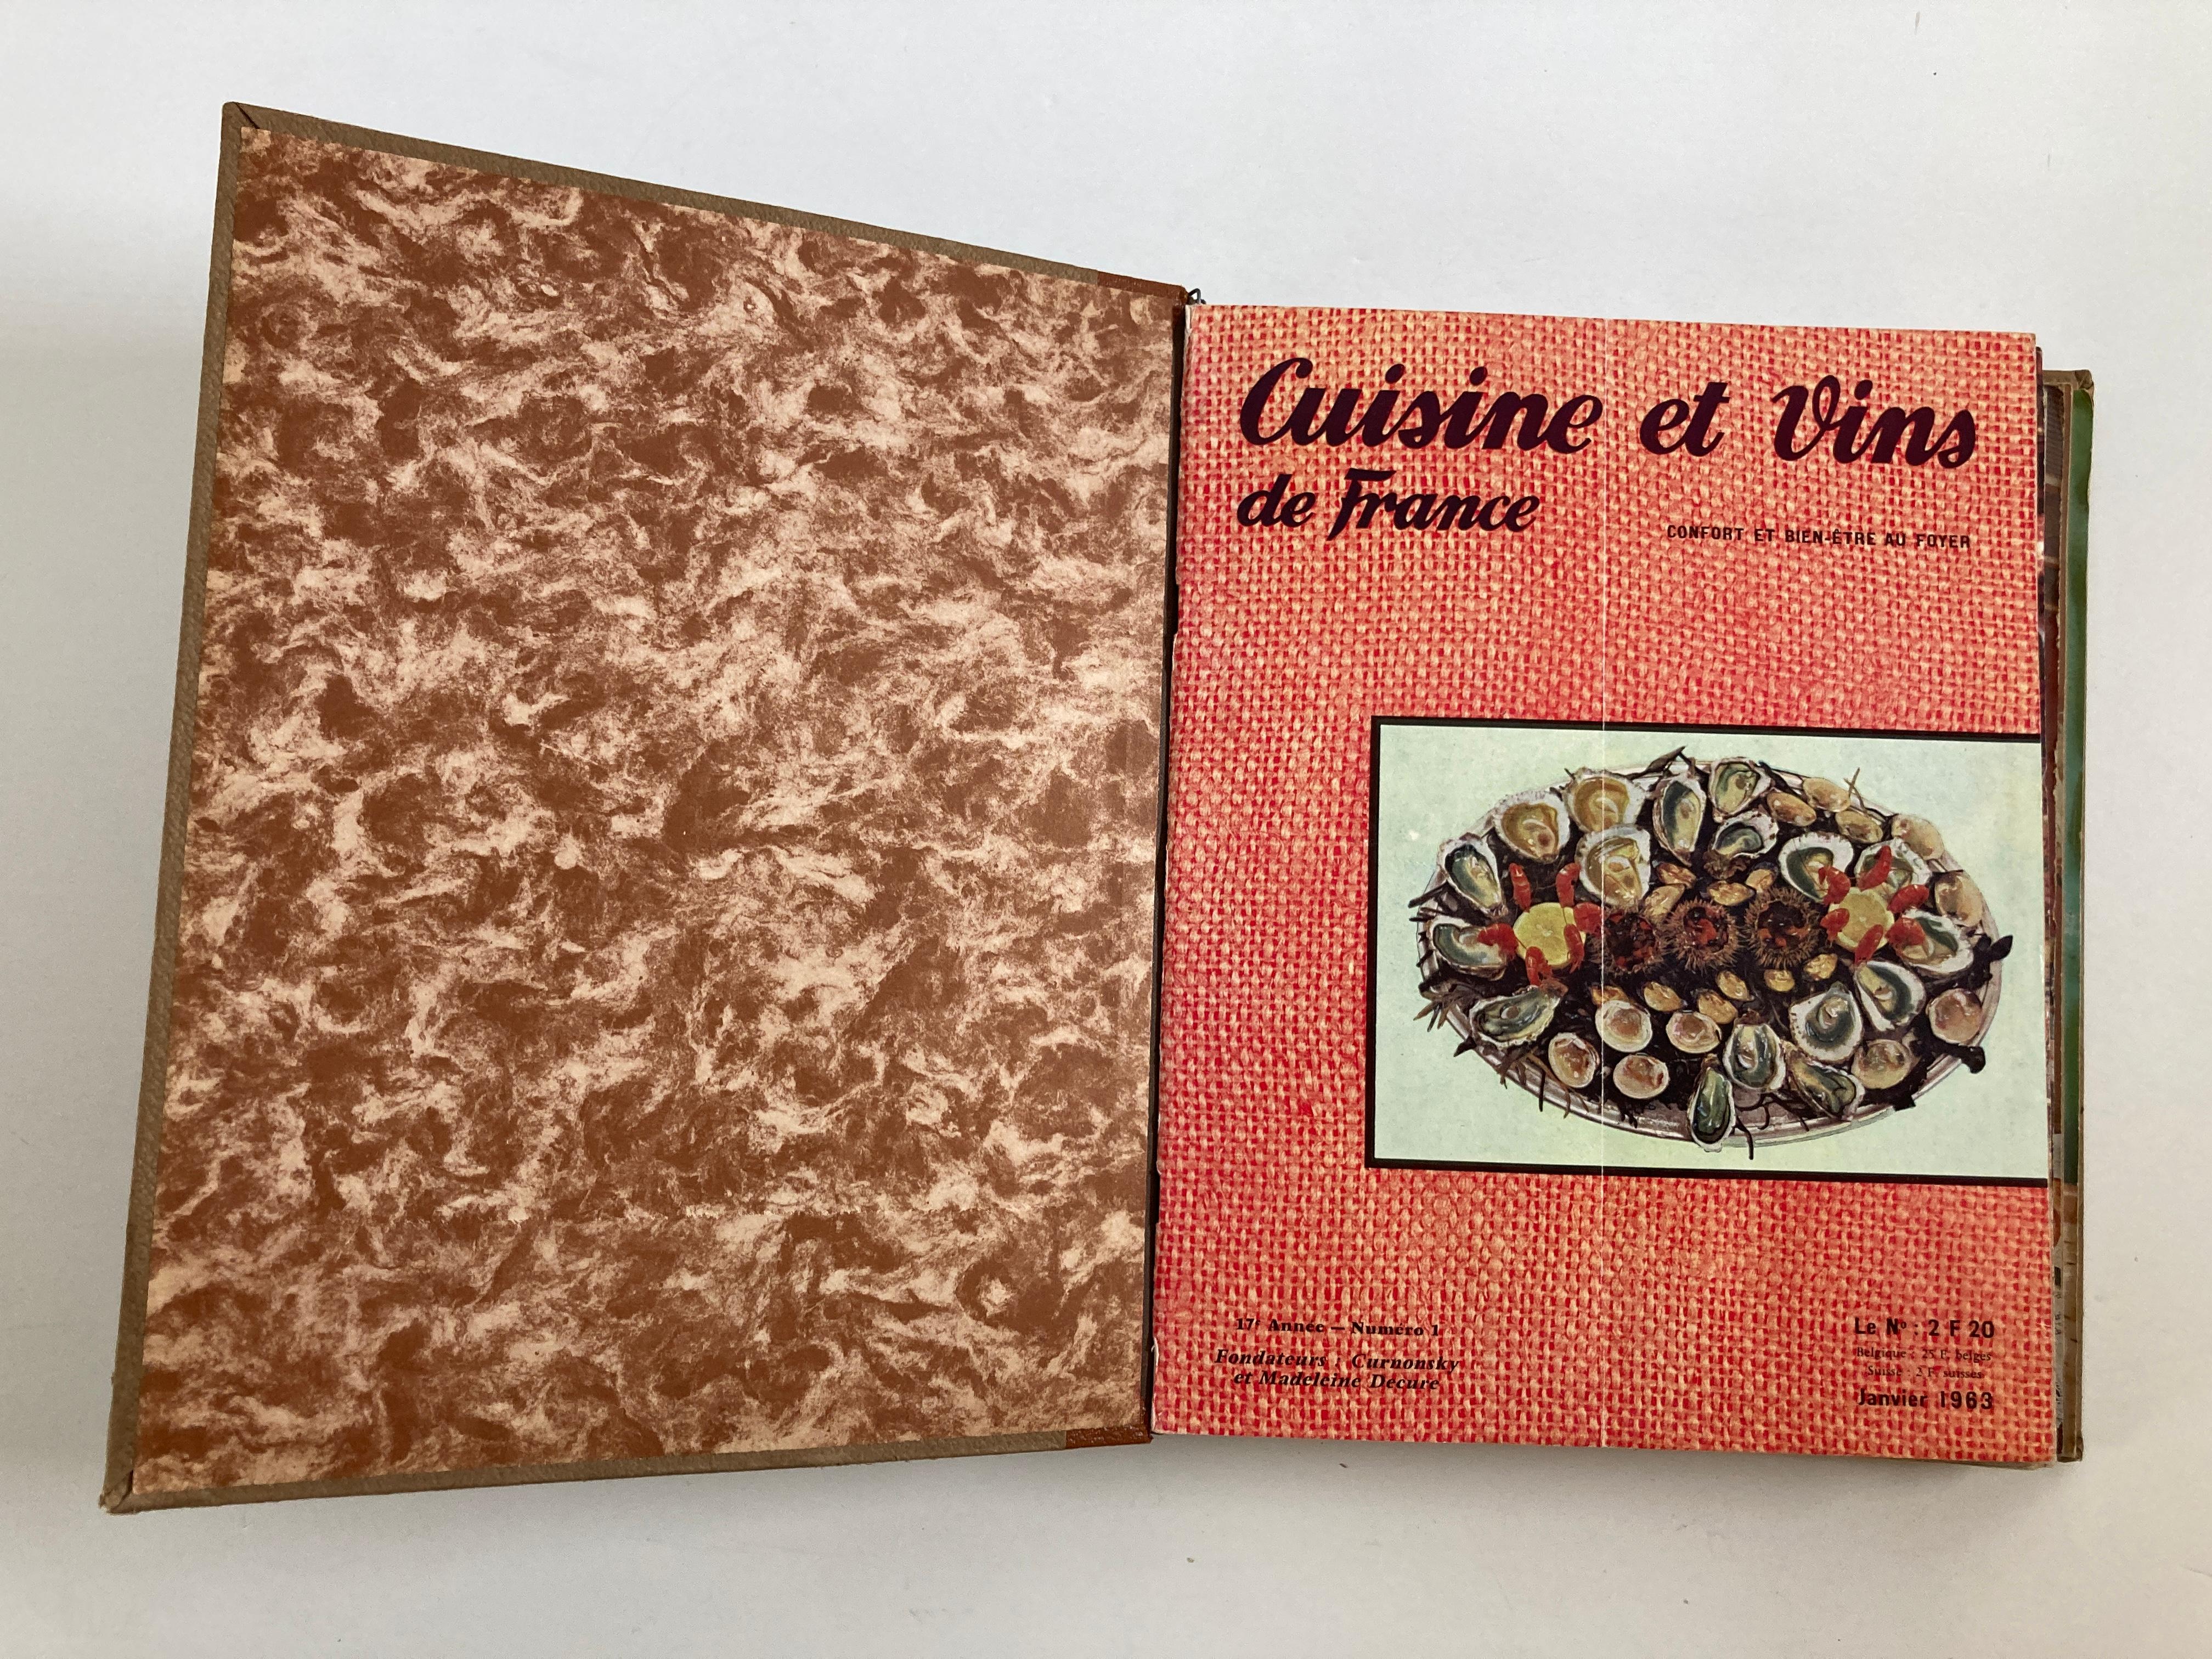 Mid-20th Century Cuisine and Wines of France by Larousse, Paris, 1963 French Cuisine Book